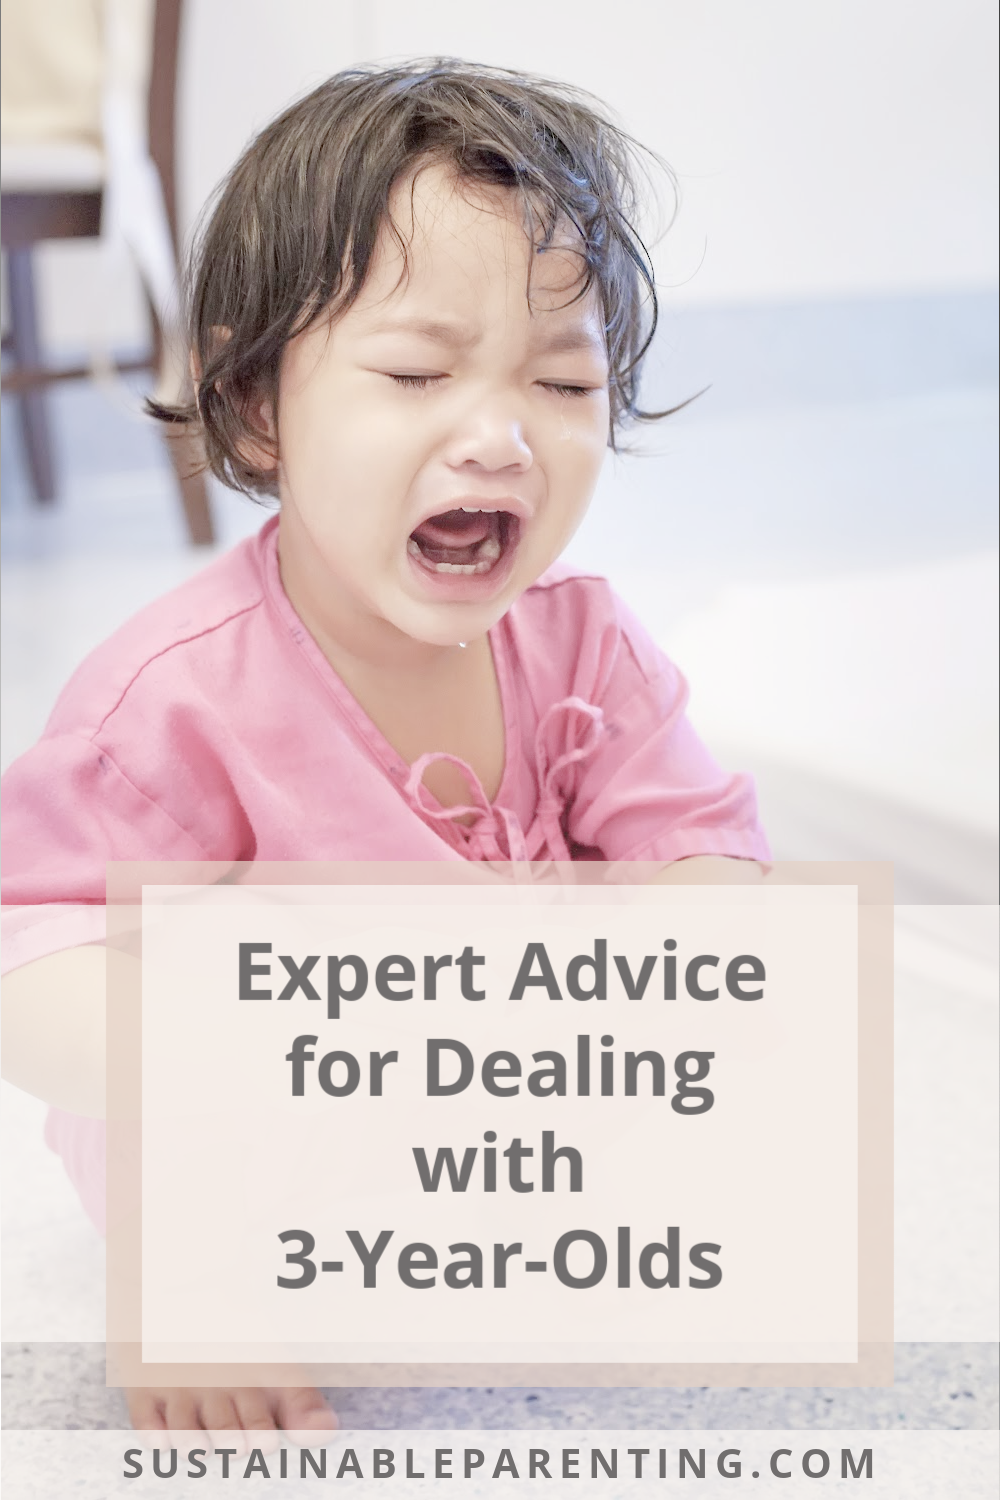 Expert Advice for Dealing with 3-Year-Olds